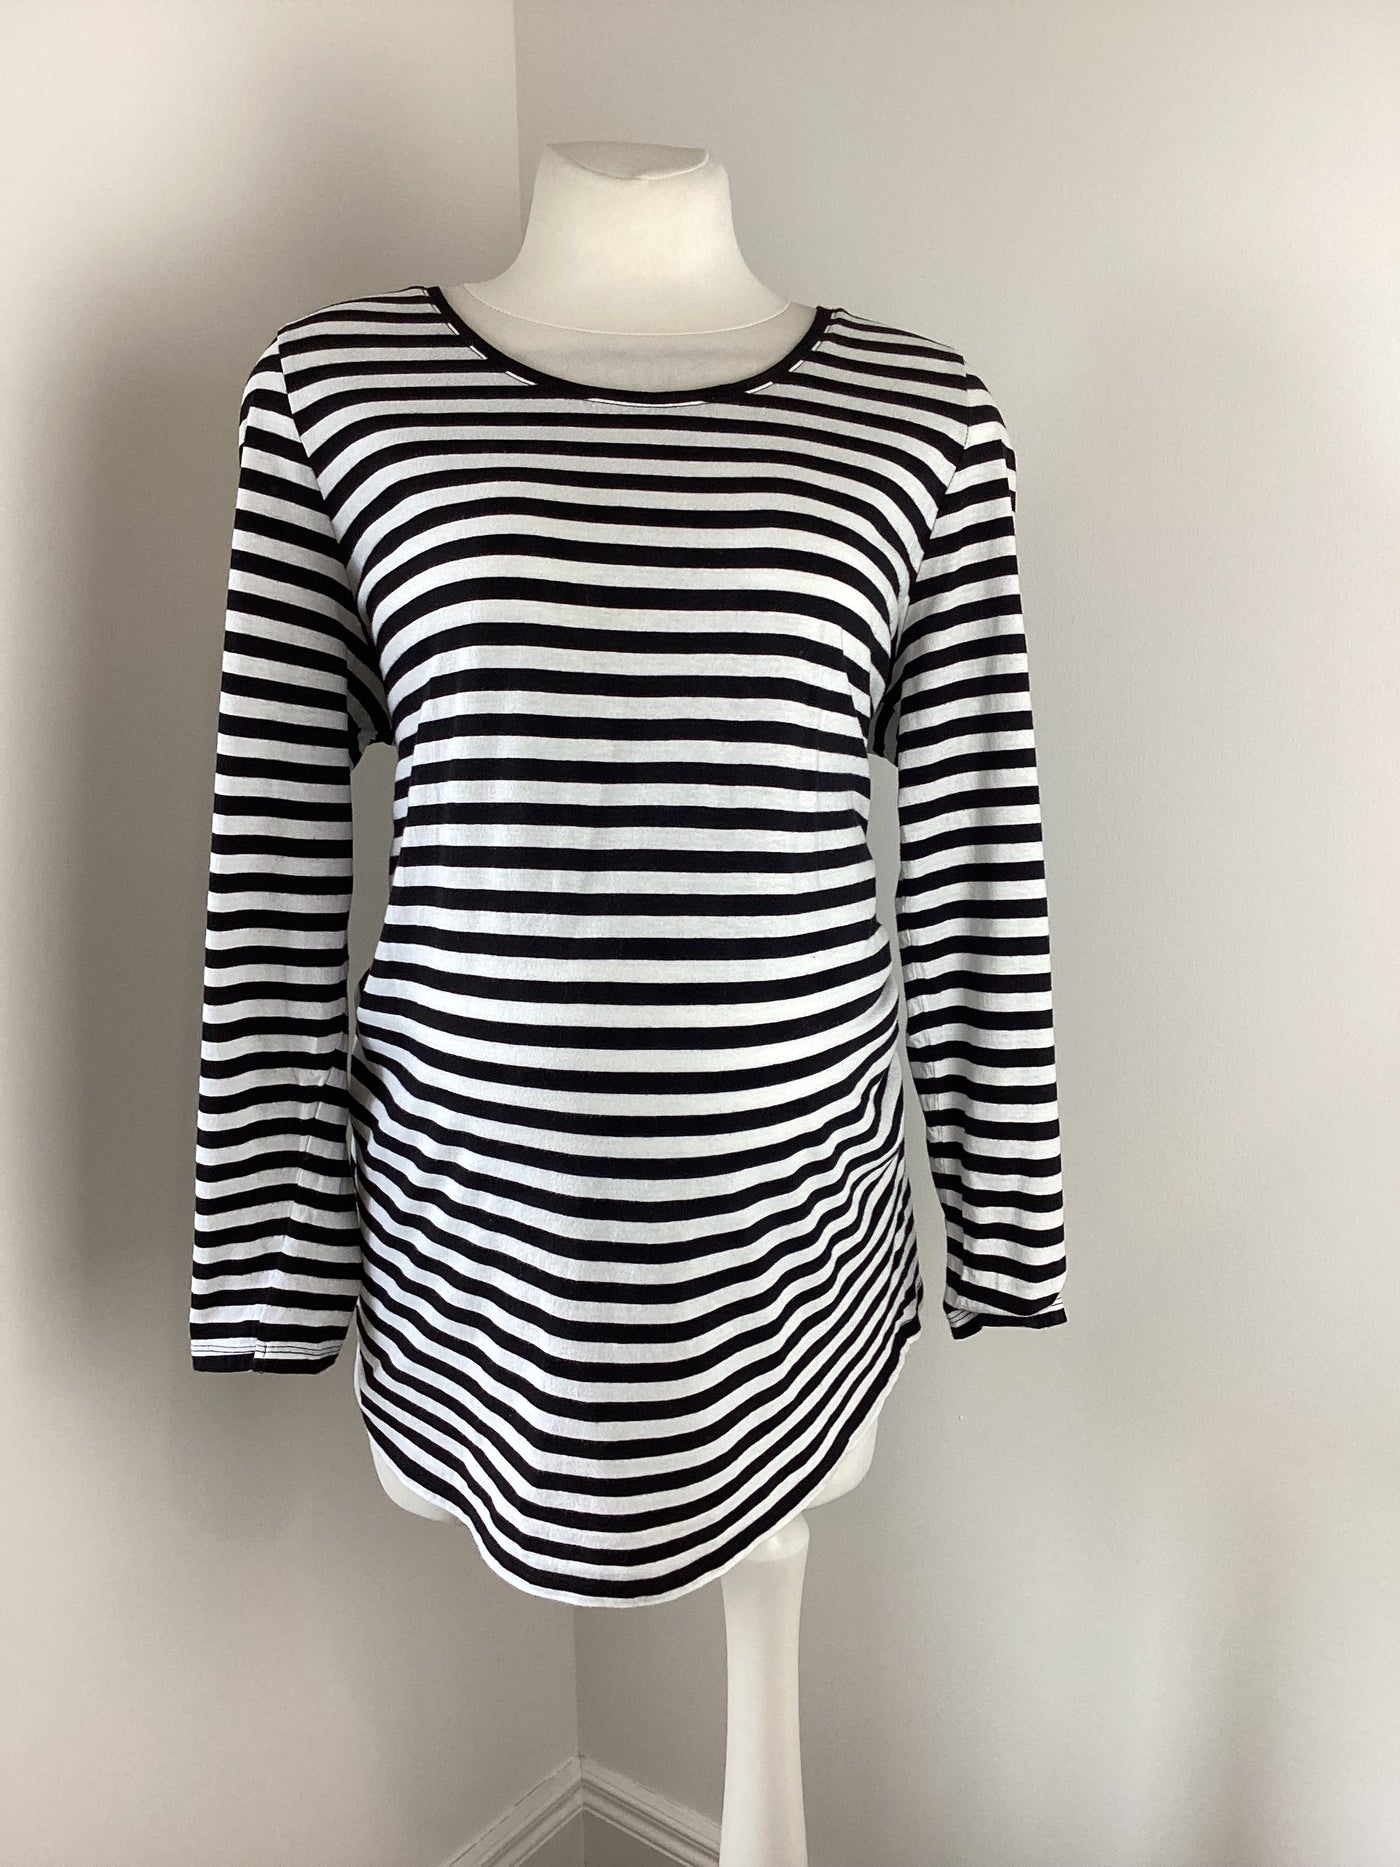 New Look Maternity black & white striped top - Size 18